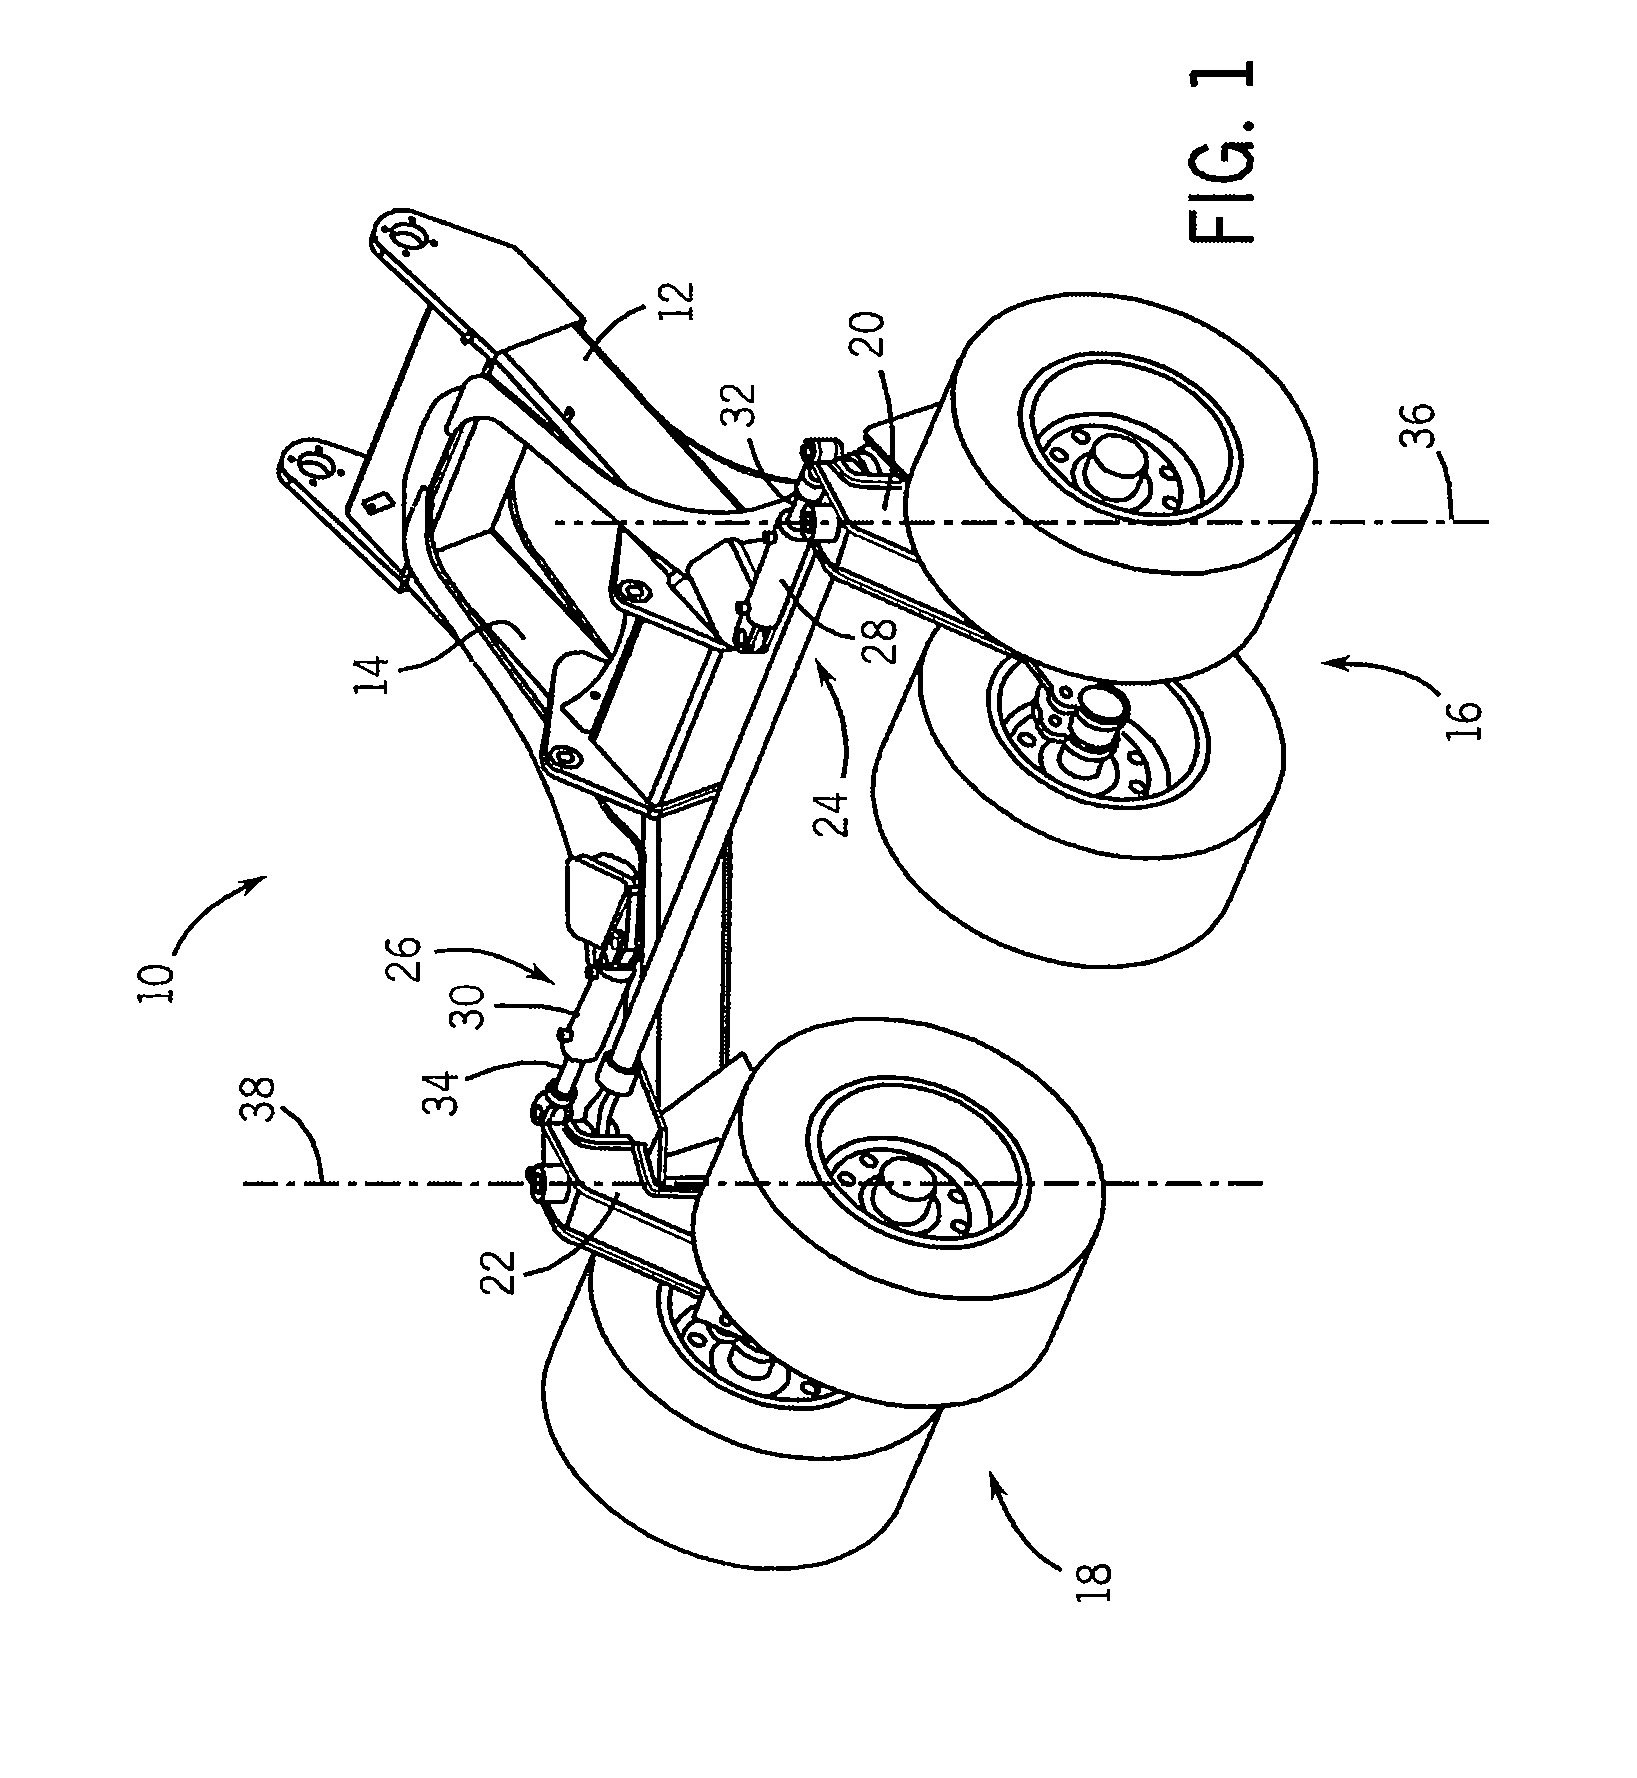 Method For Automatic Headland Turn Correction Of Farm Implement Steered By Implement Steering System